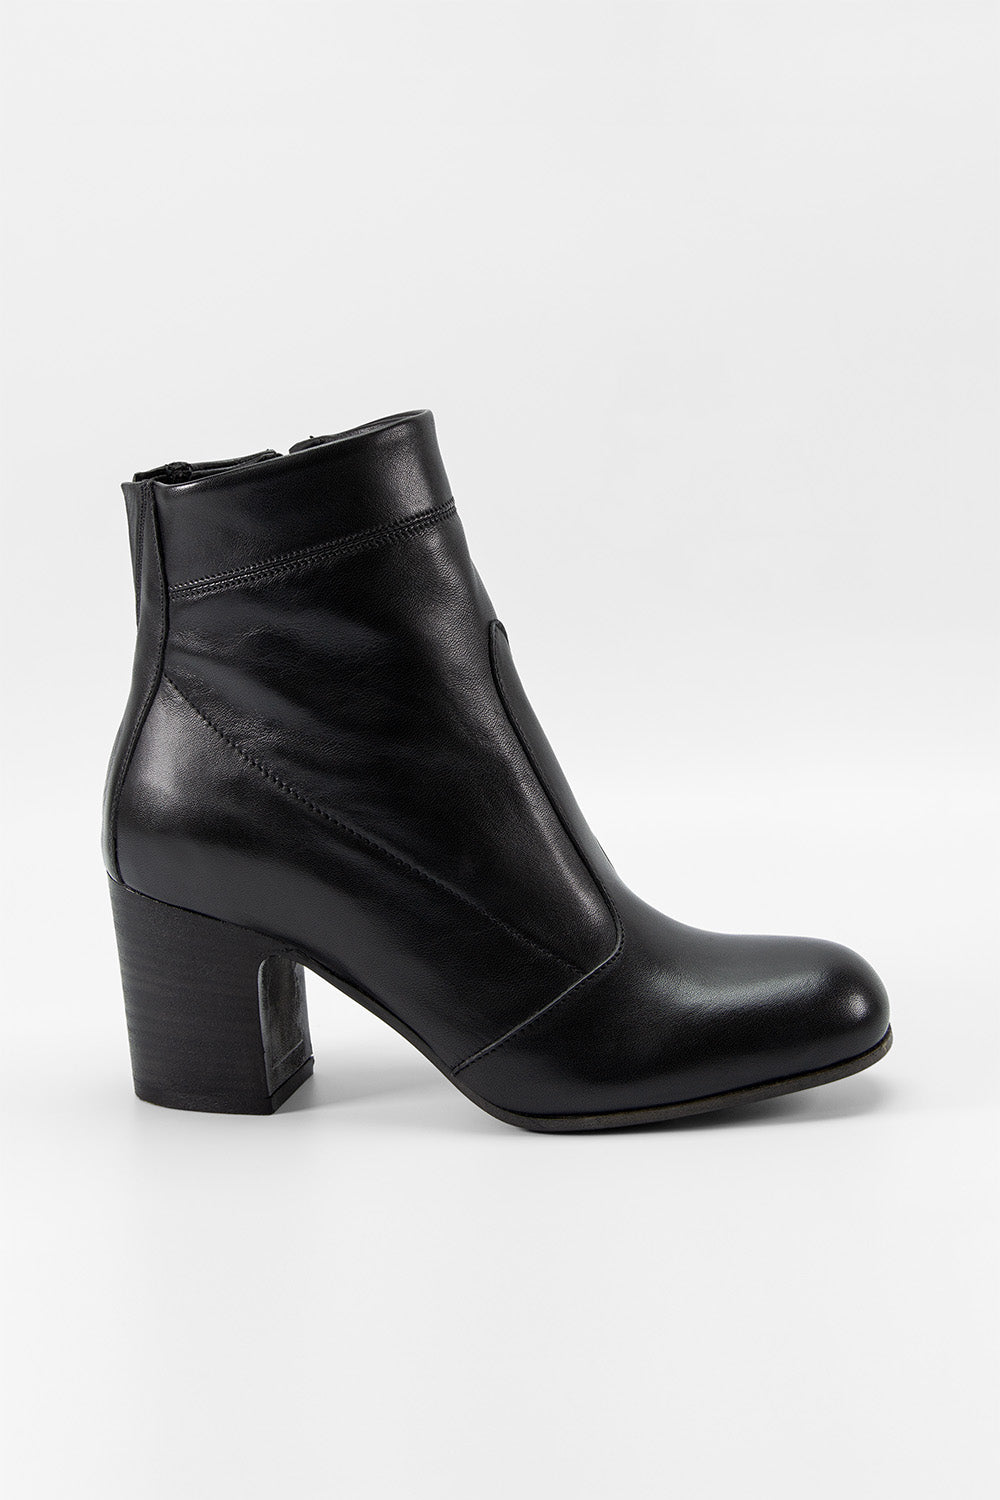 MOORE infinite-black fitted ankle boots | untamed street | women ...